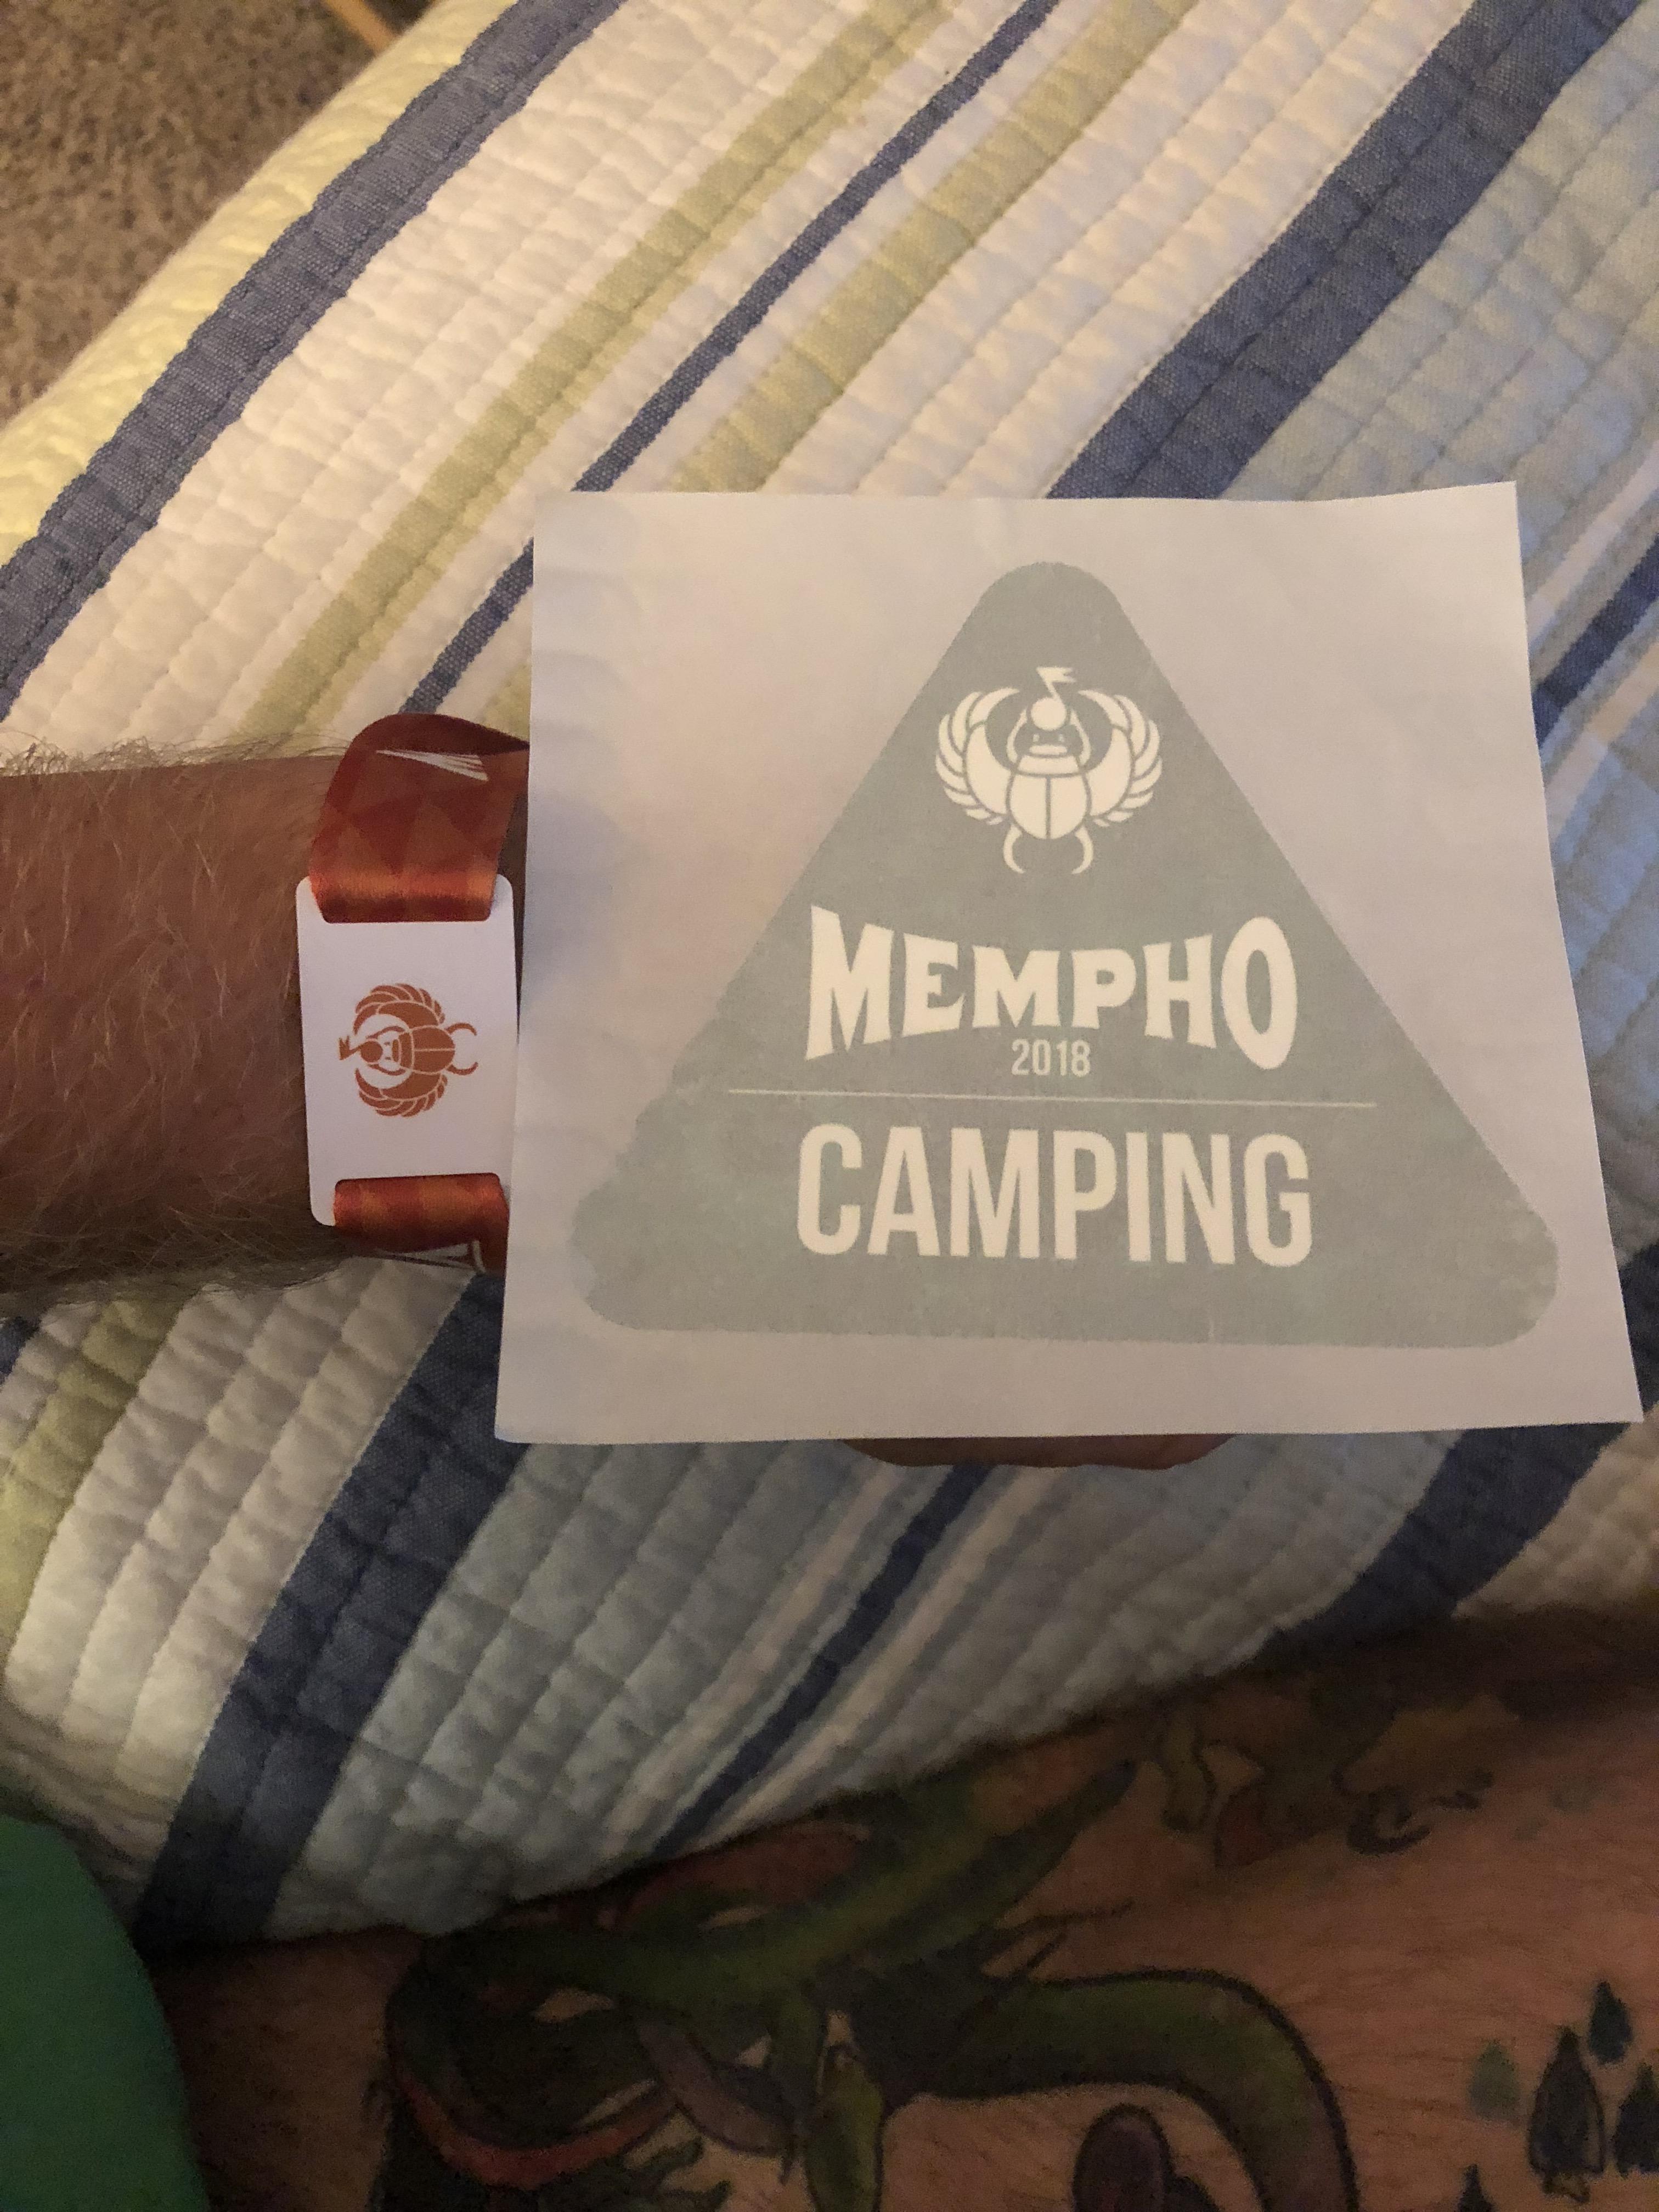 Roo Camping Logo - Camping solo at Mempho fest in Memphis this weekend. Any chance I'll